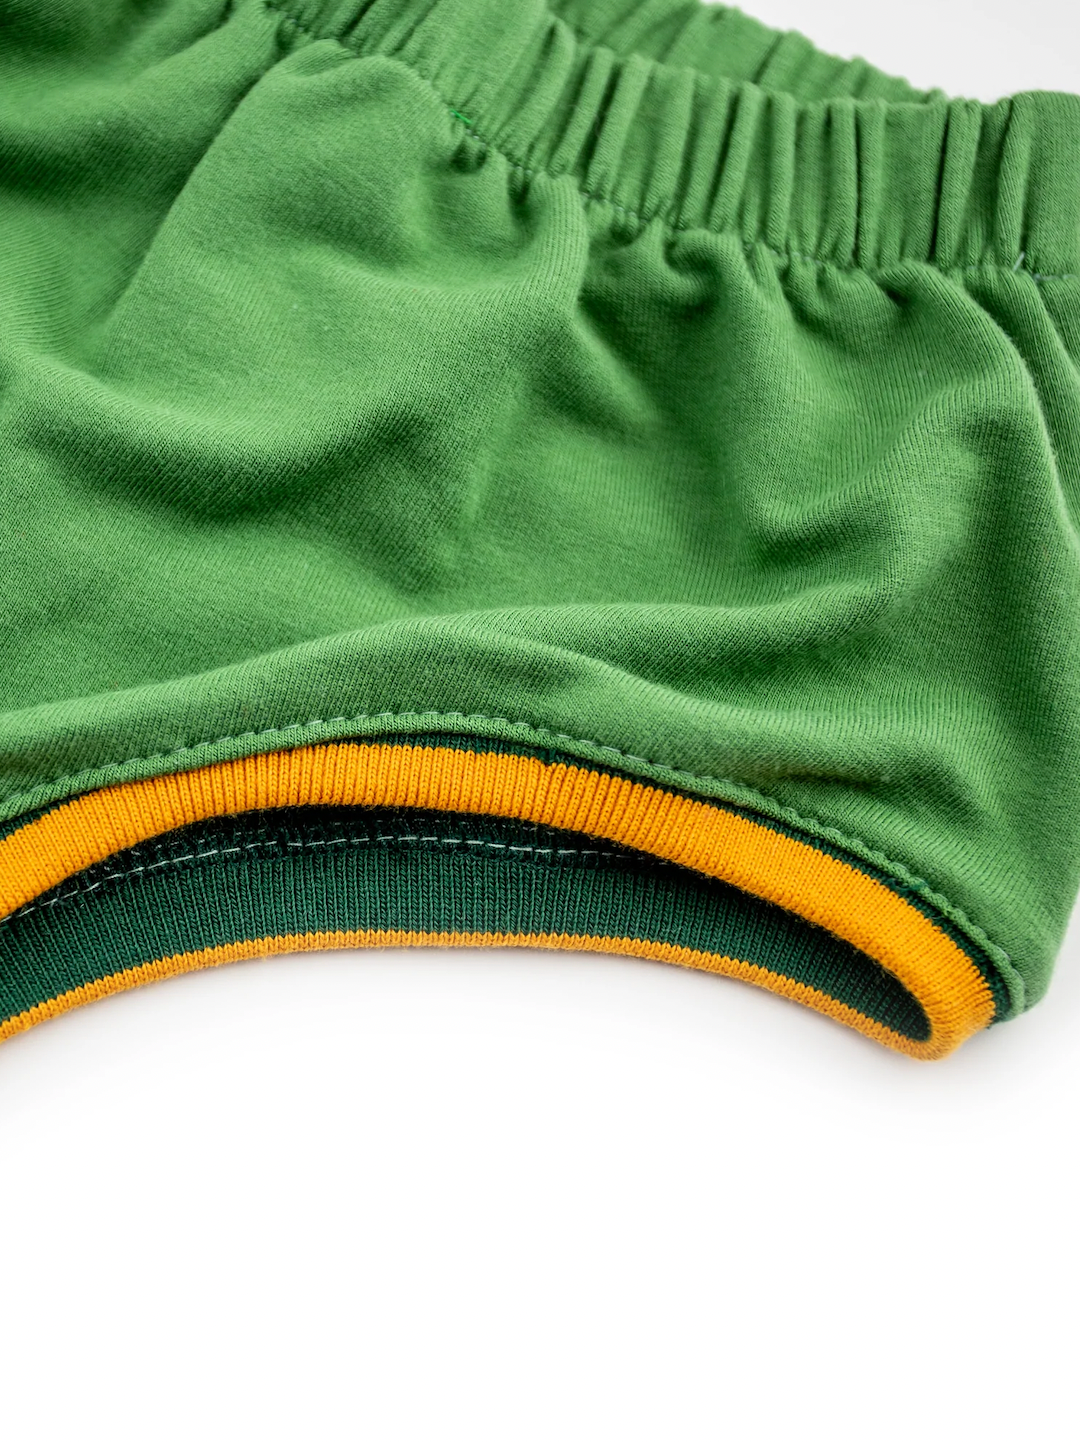 Mint | Detail of yellow trim at leg hole of mint green kids' bloomers